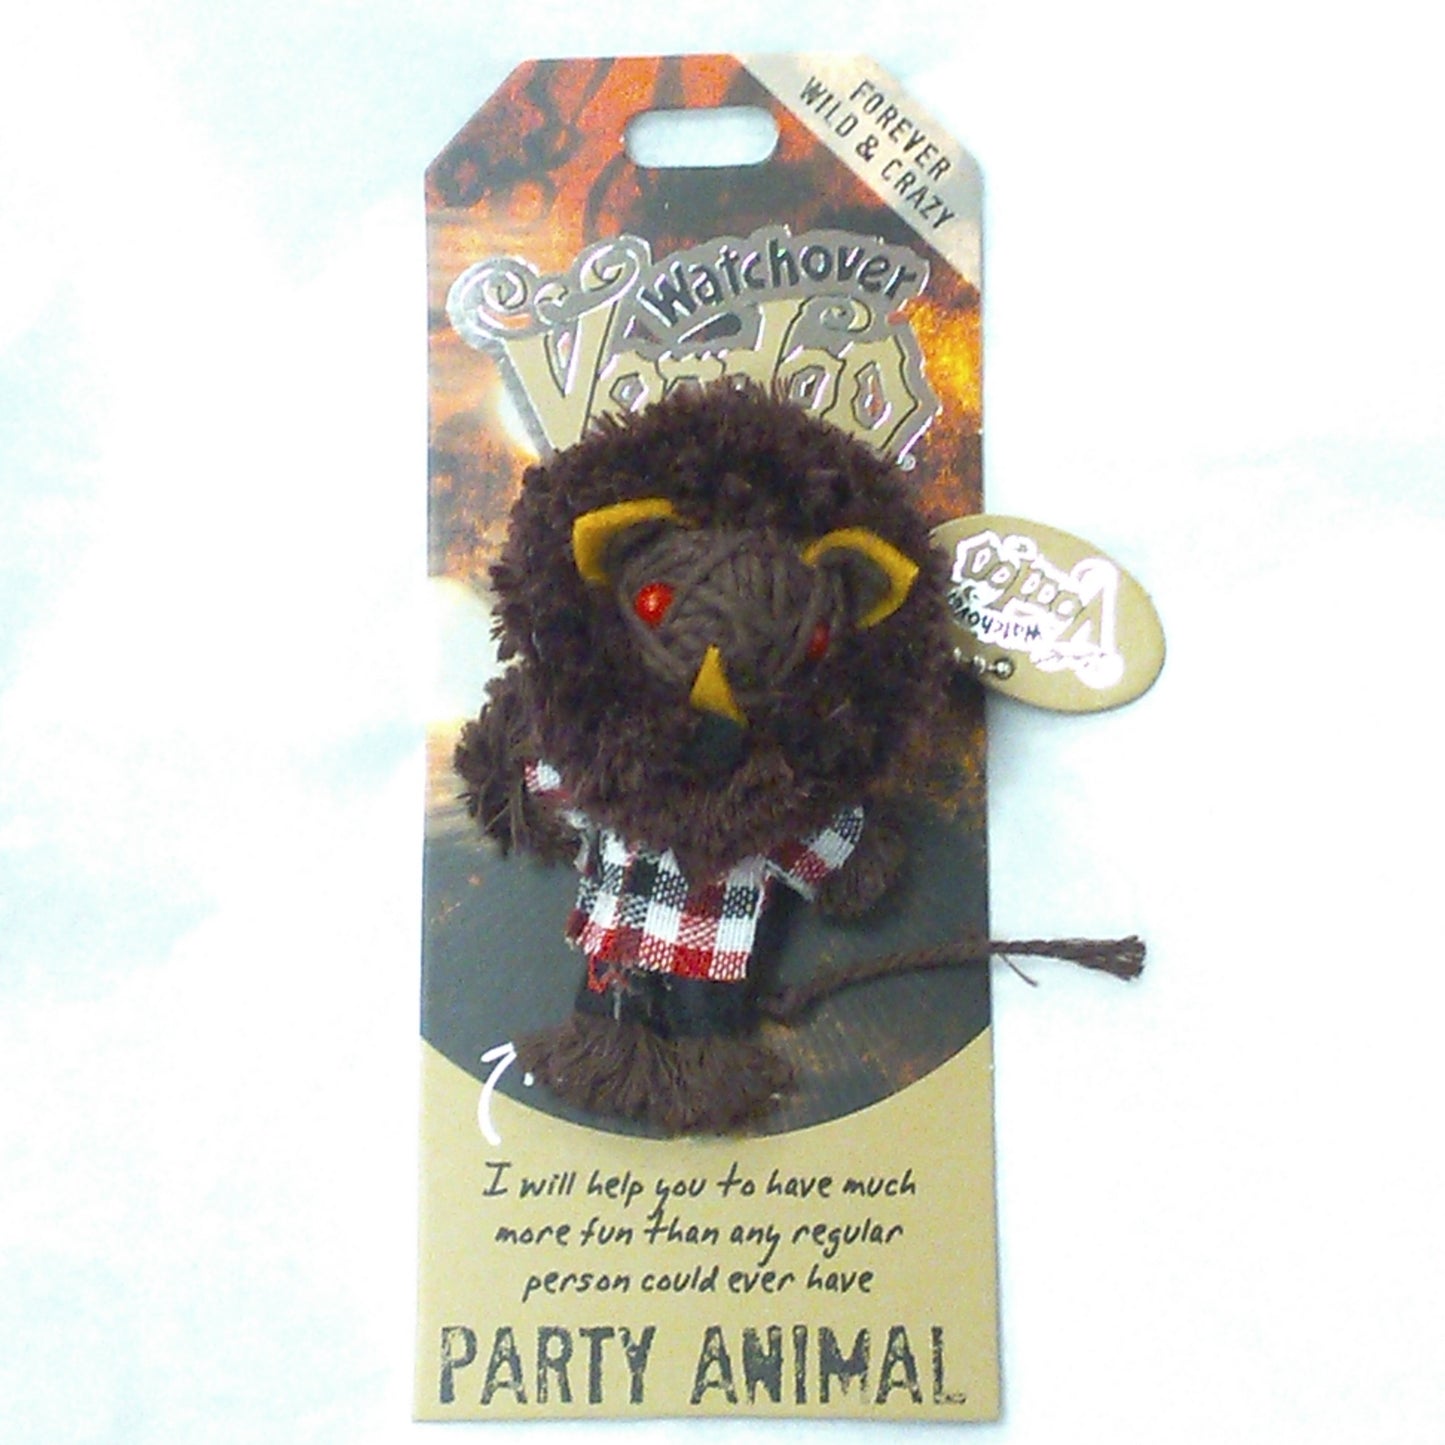 Voodoo Keychain - Party Animal